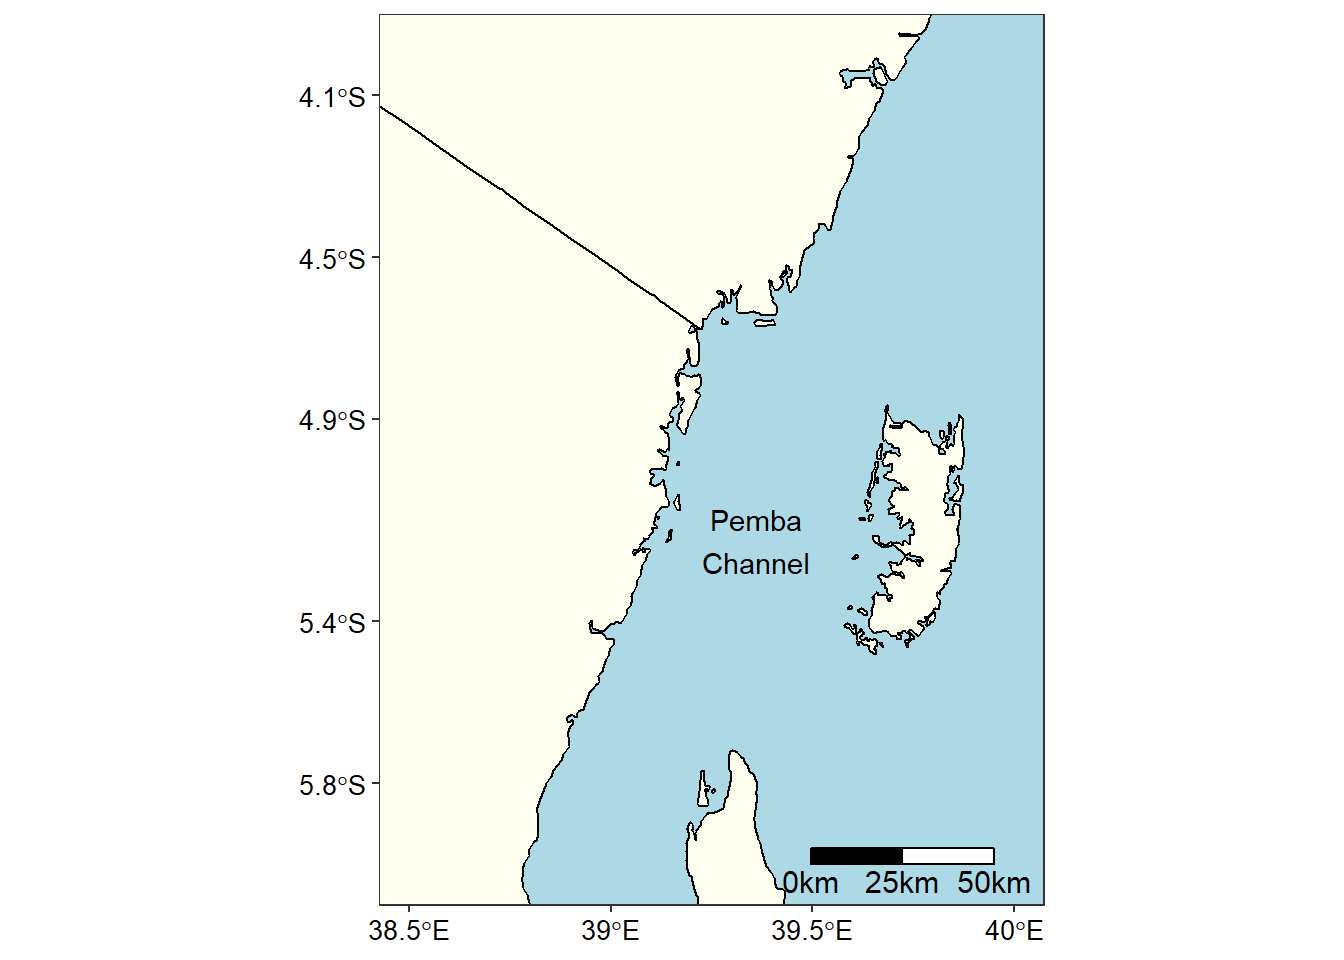  A map showing the location of the Pemba channel in the Indian Ocean Region (WIO)